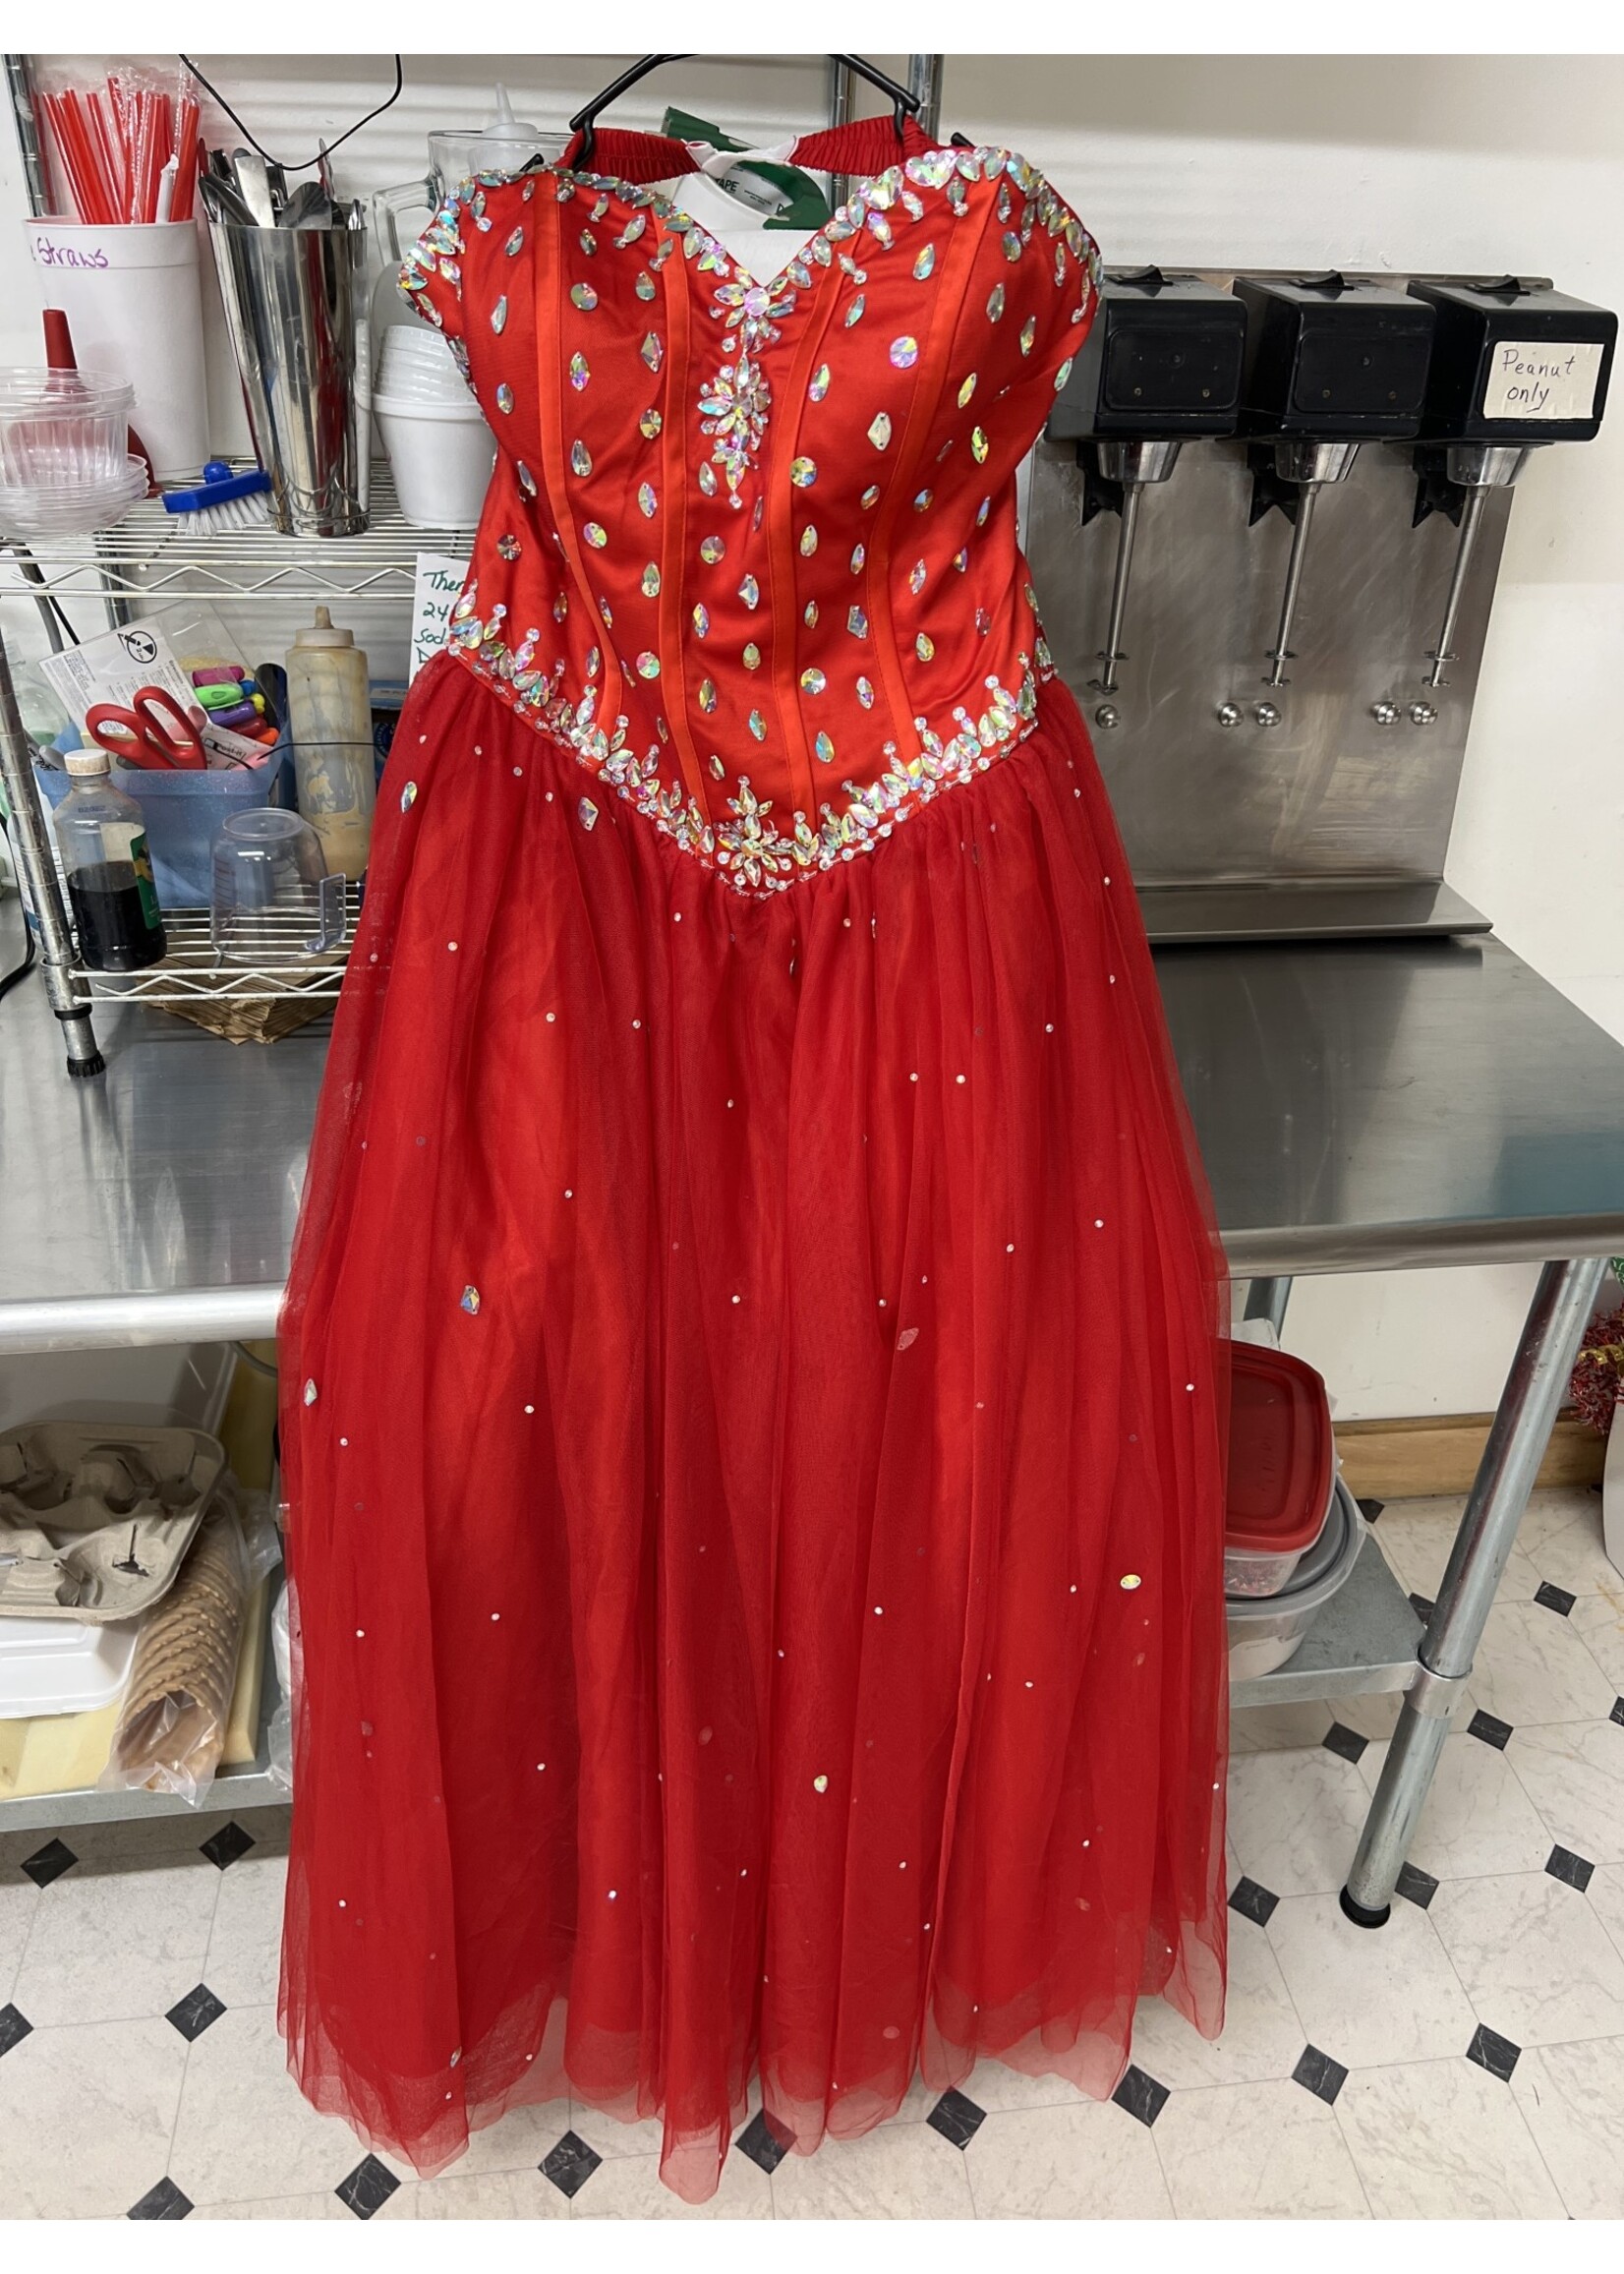 Red Sleeveless Dress with gems- no tags- appears to be size 16